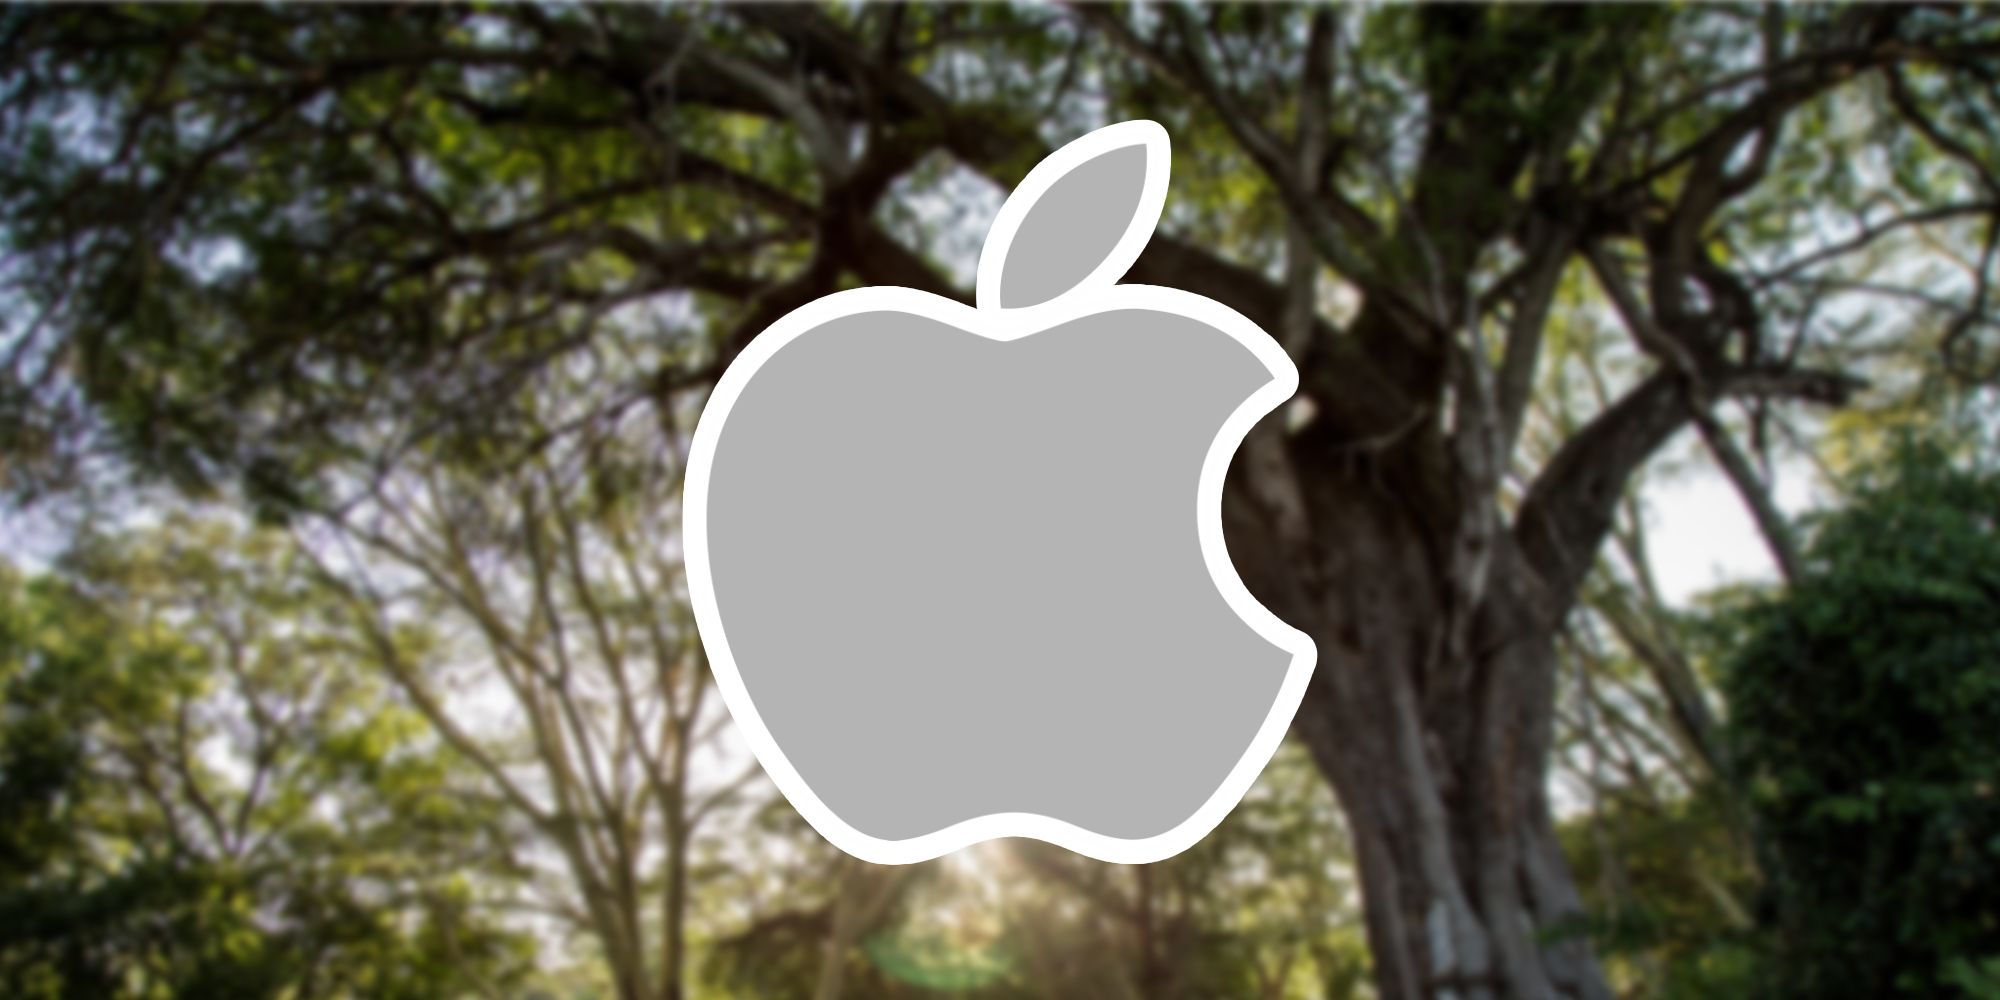 Apple logo in front of trees in a forest